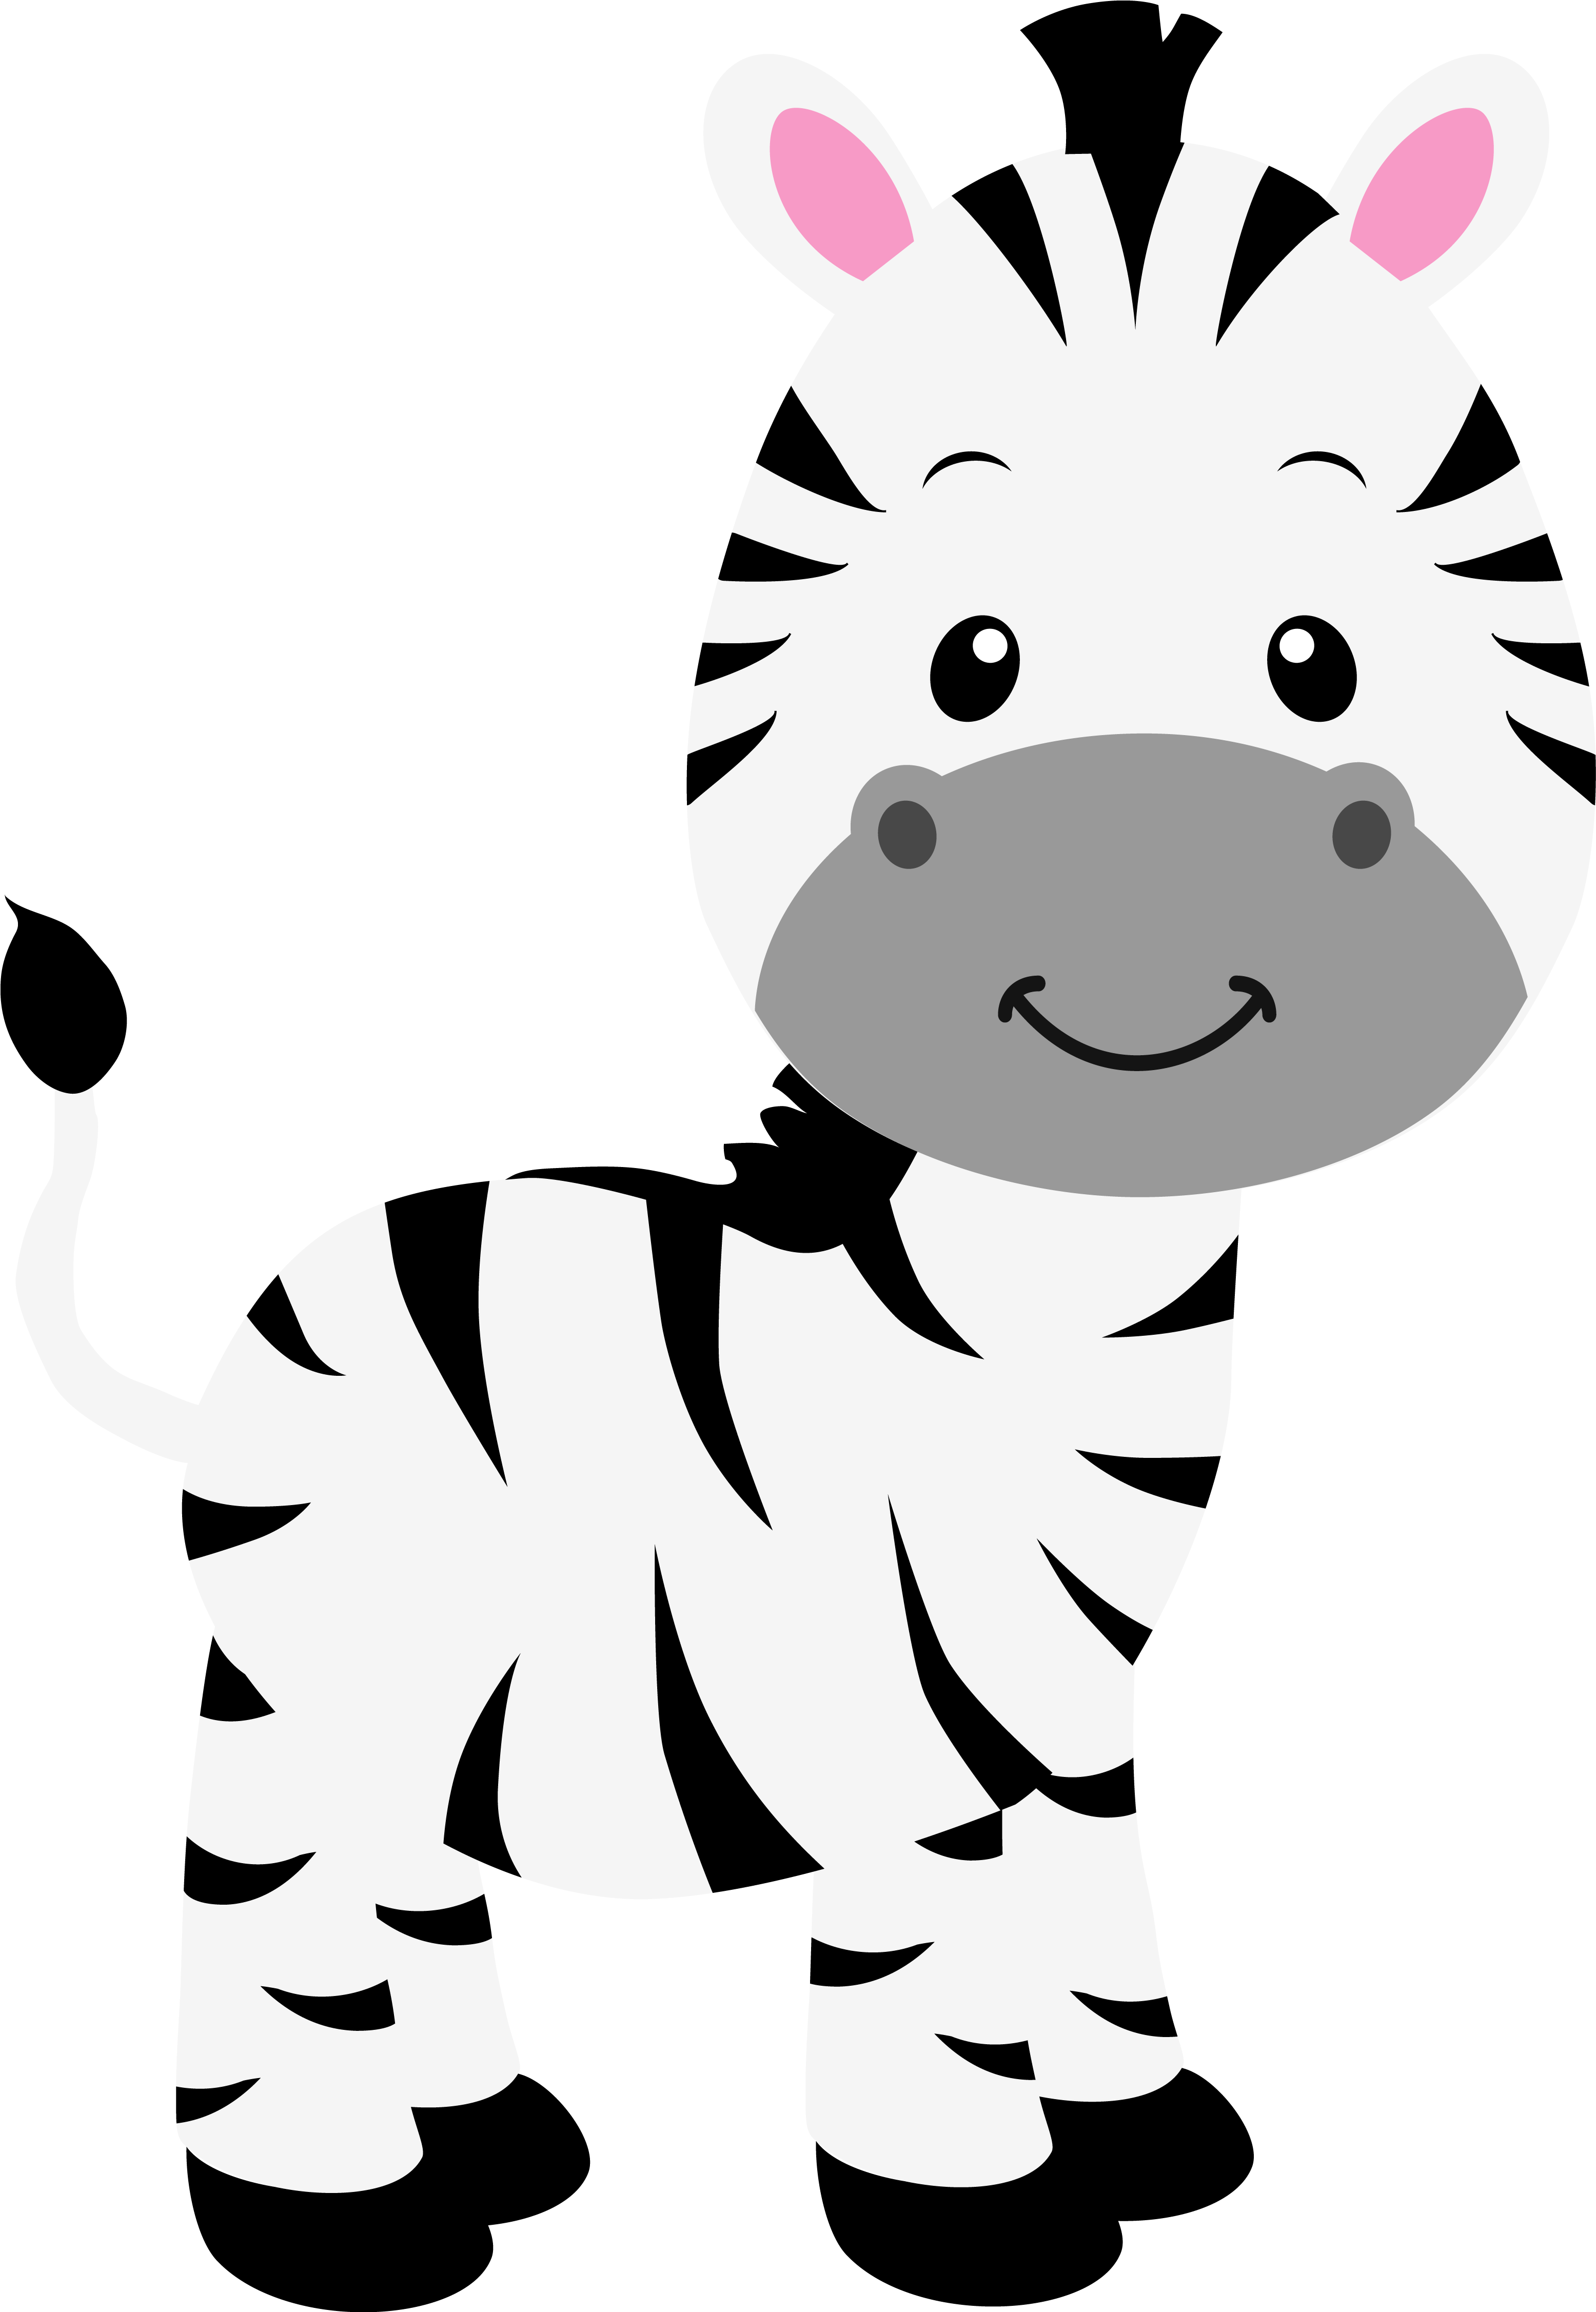 Download Baby Zebra Vector at Vectorified.com | Collection of Baby ...